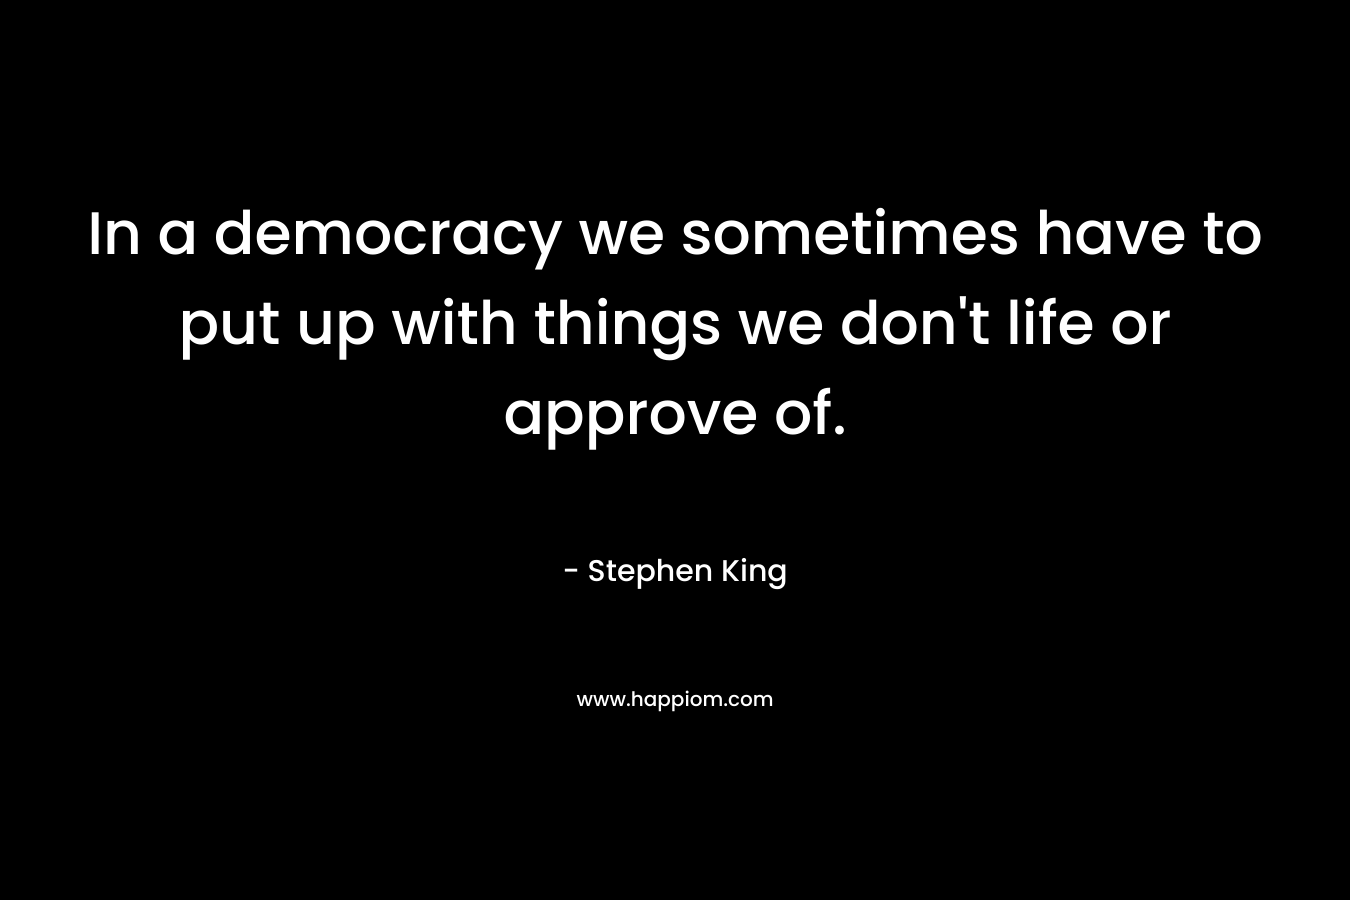 In a democracy we sometimes have to put up with things we don’t life or approve of. – Stephen King